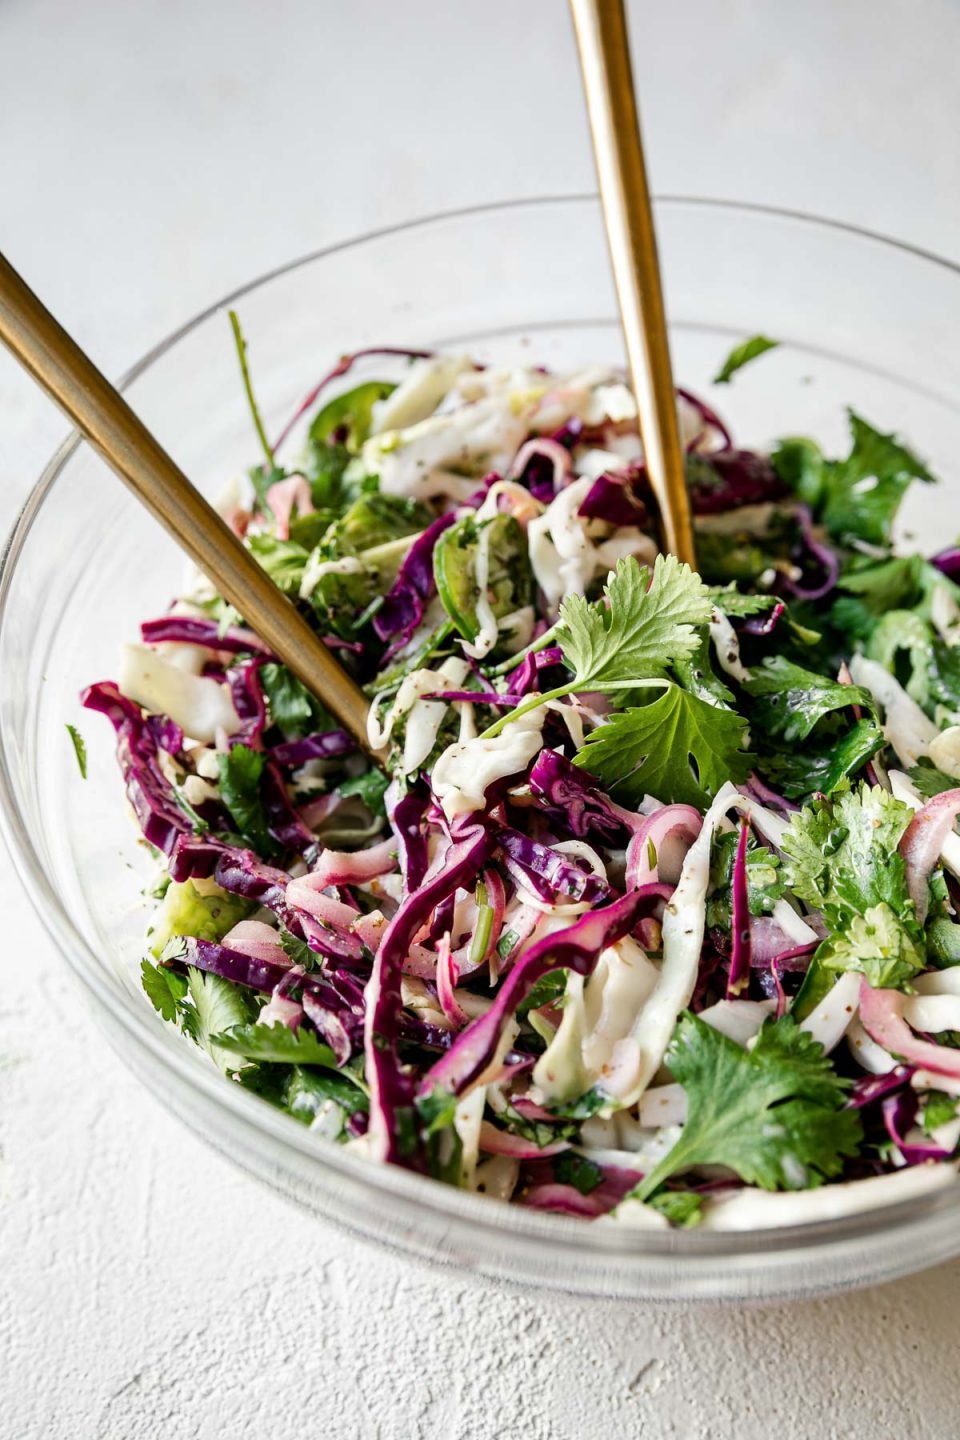 Side angle of easy slaw shown in a large glass mixing bowl atop a textured white surface with 2 gold forks inserted in it.